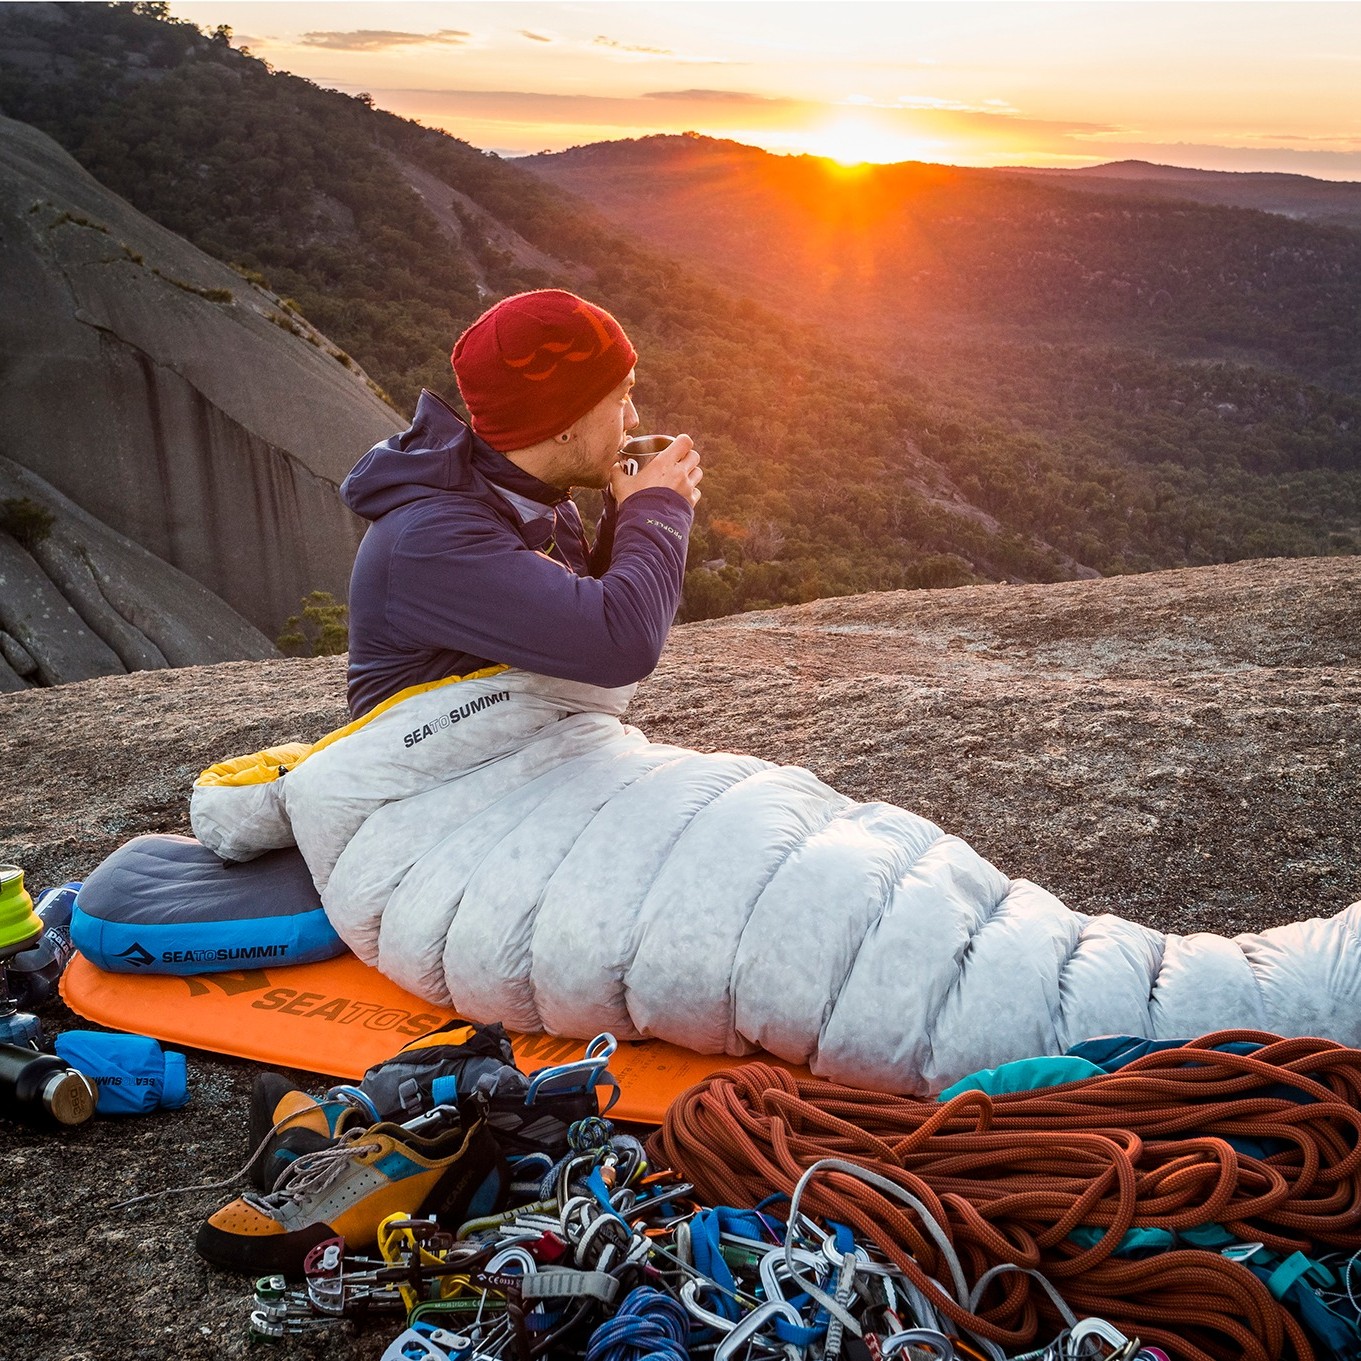 Sea to Summit UltraLight S.I. Self-Inflating Camping Mat